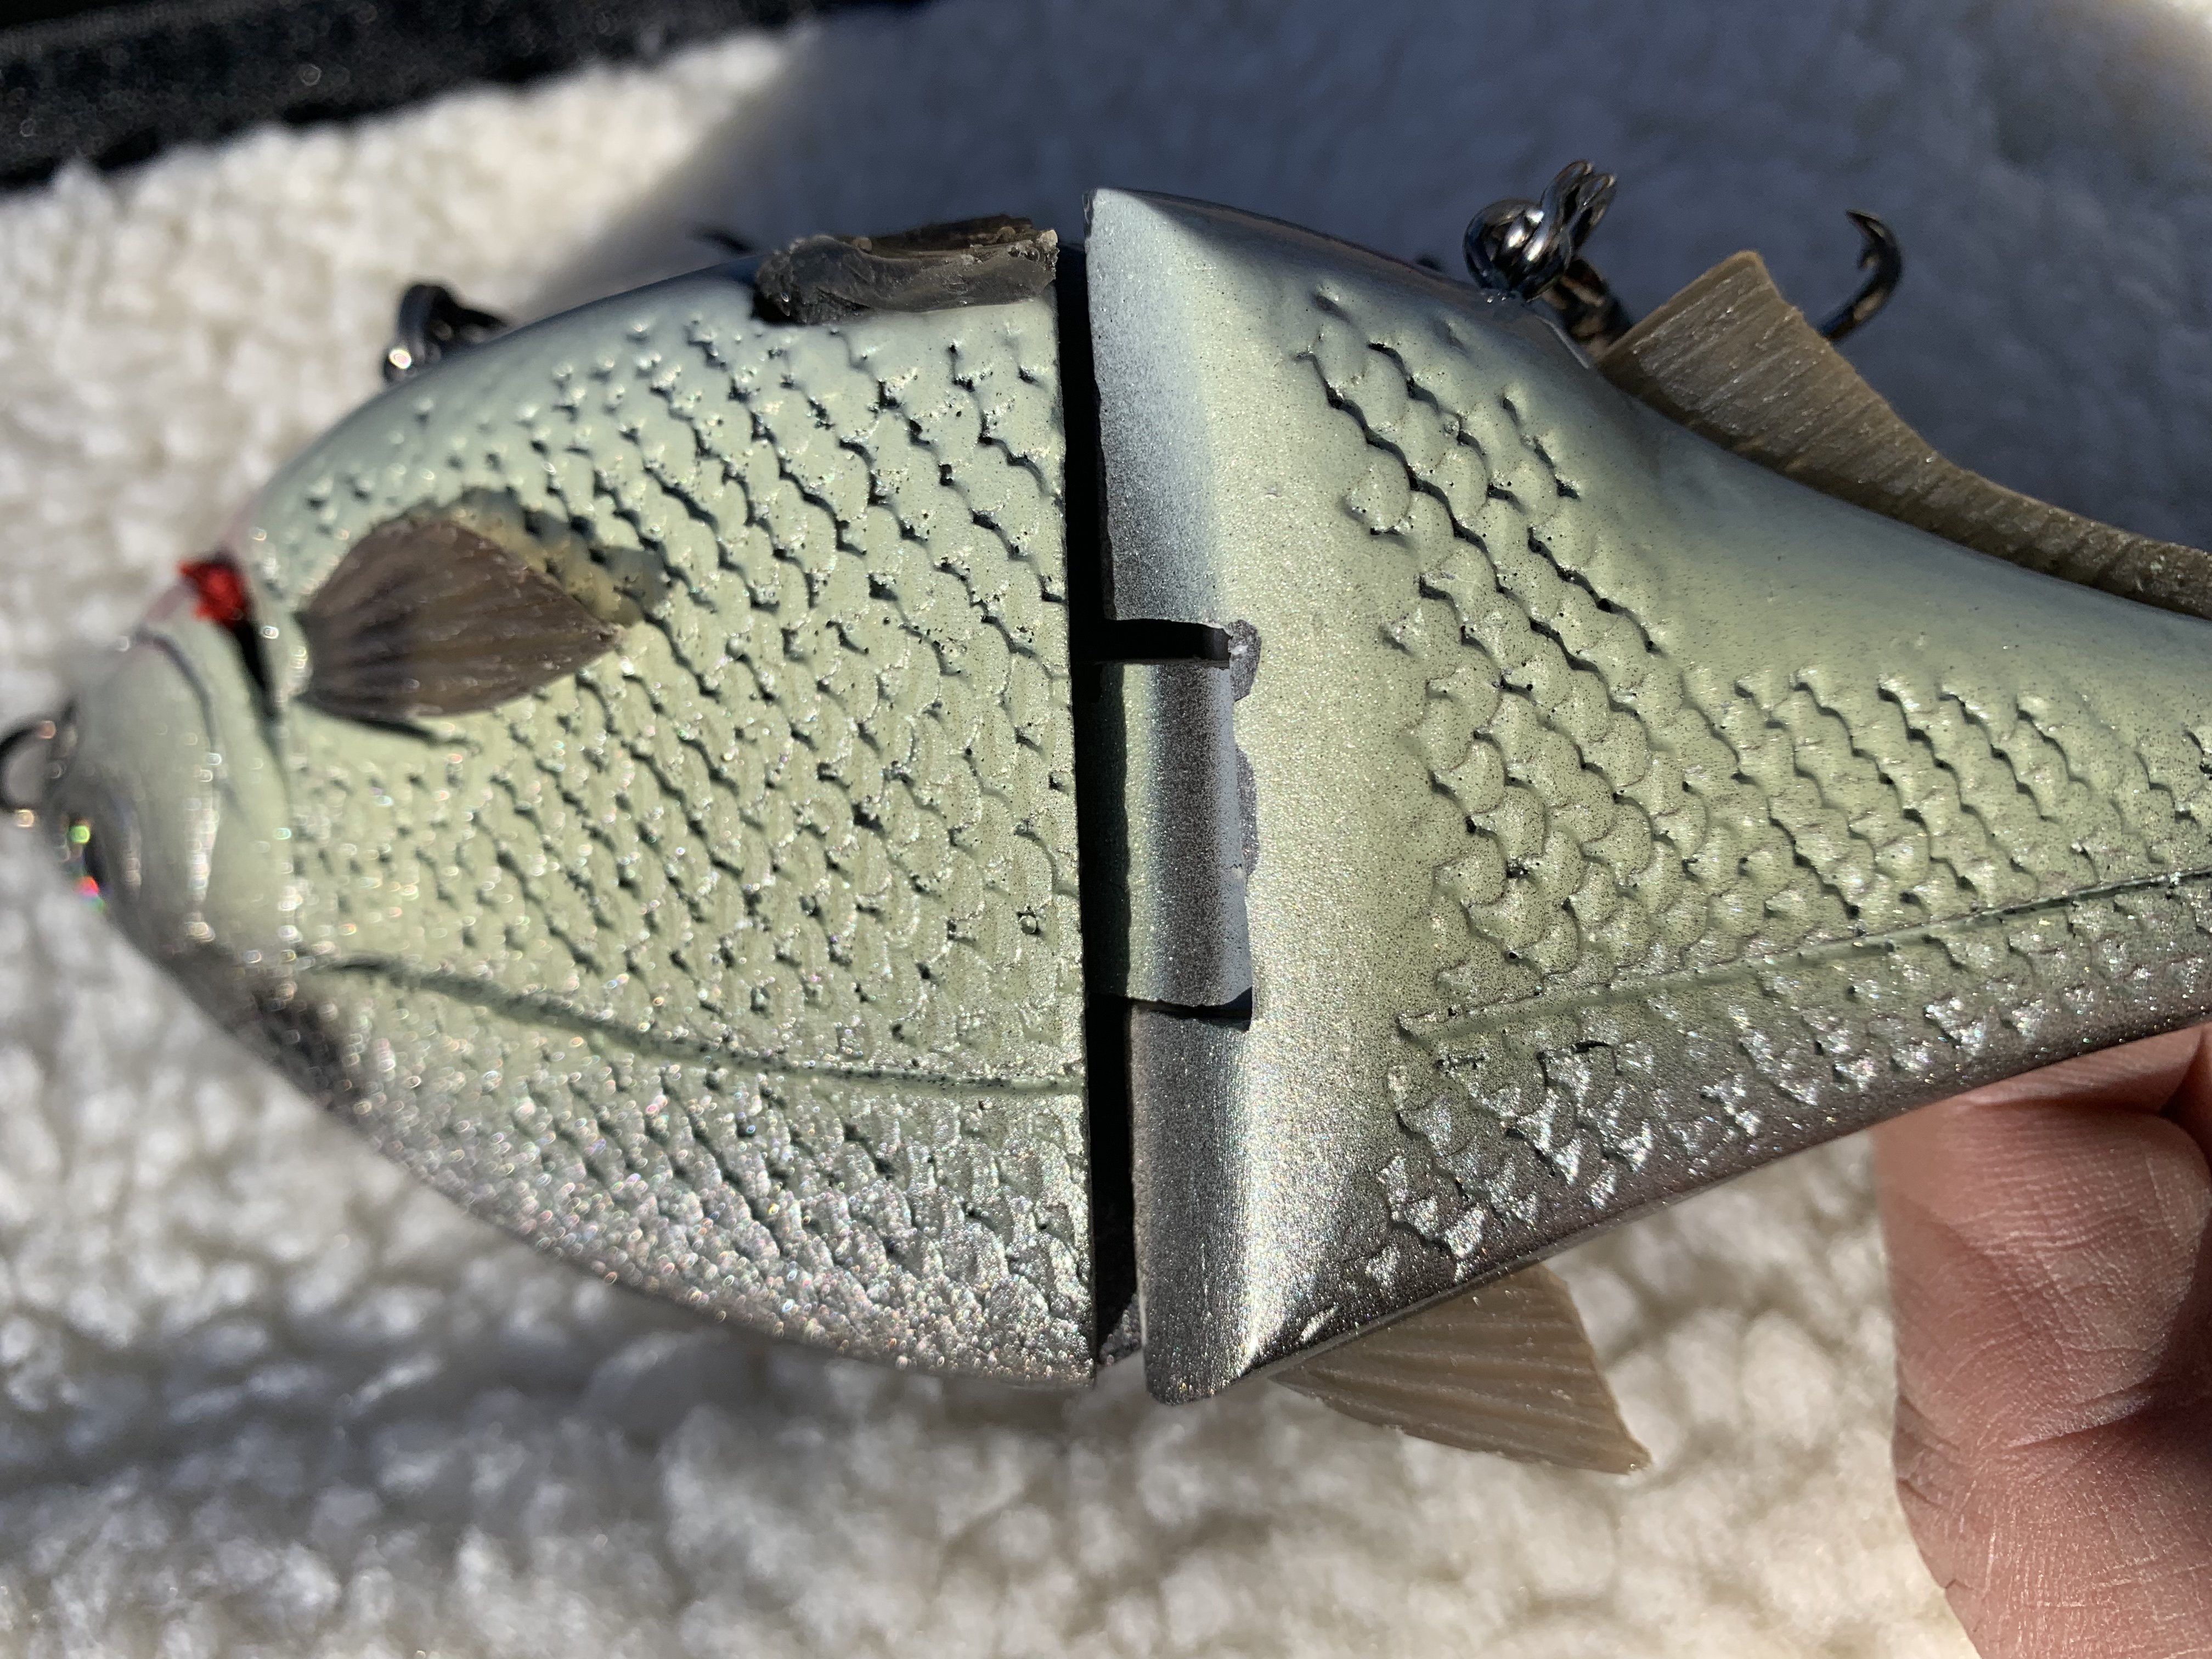 Swimbait Review: Hinkle Shad 